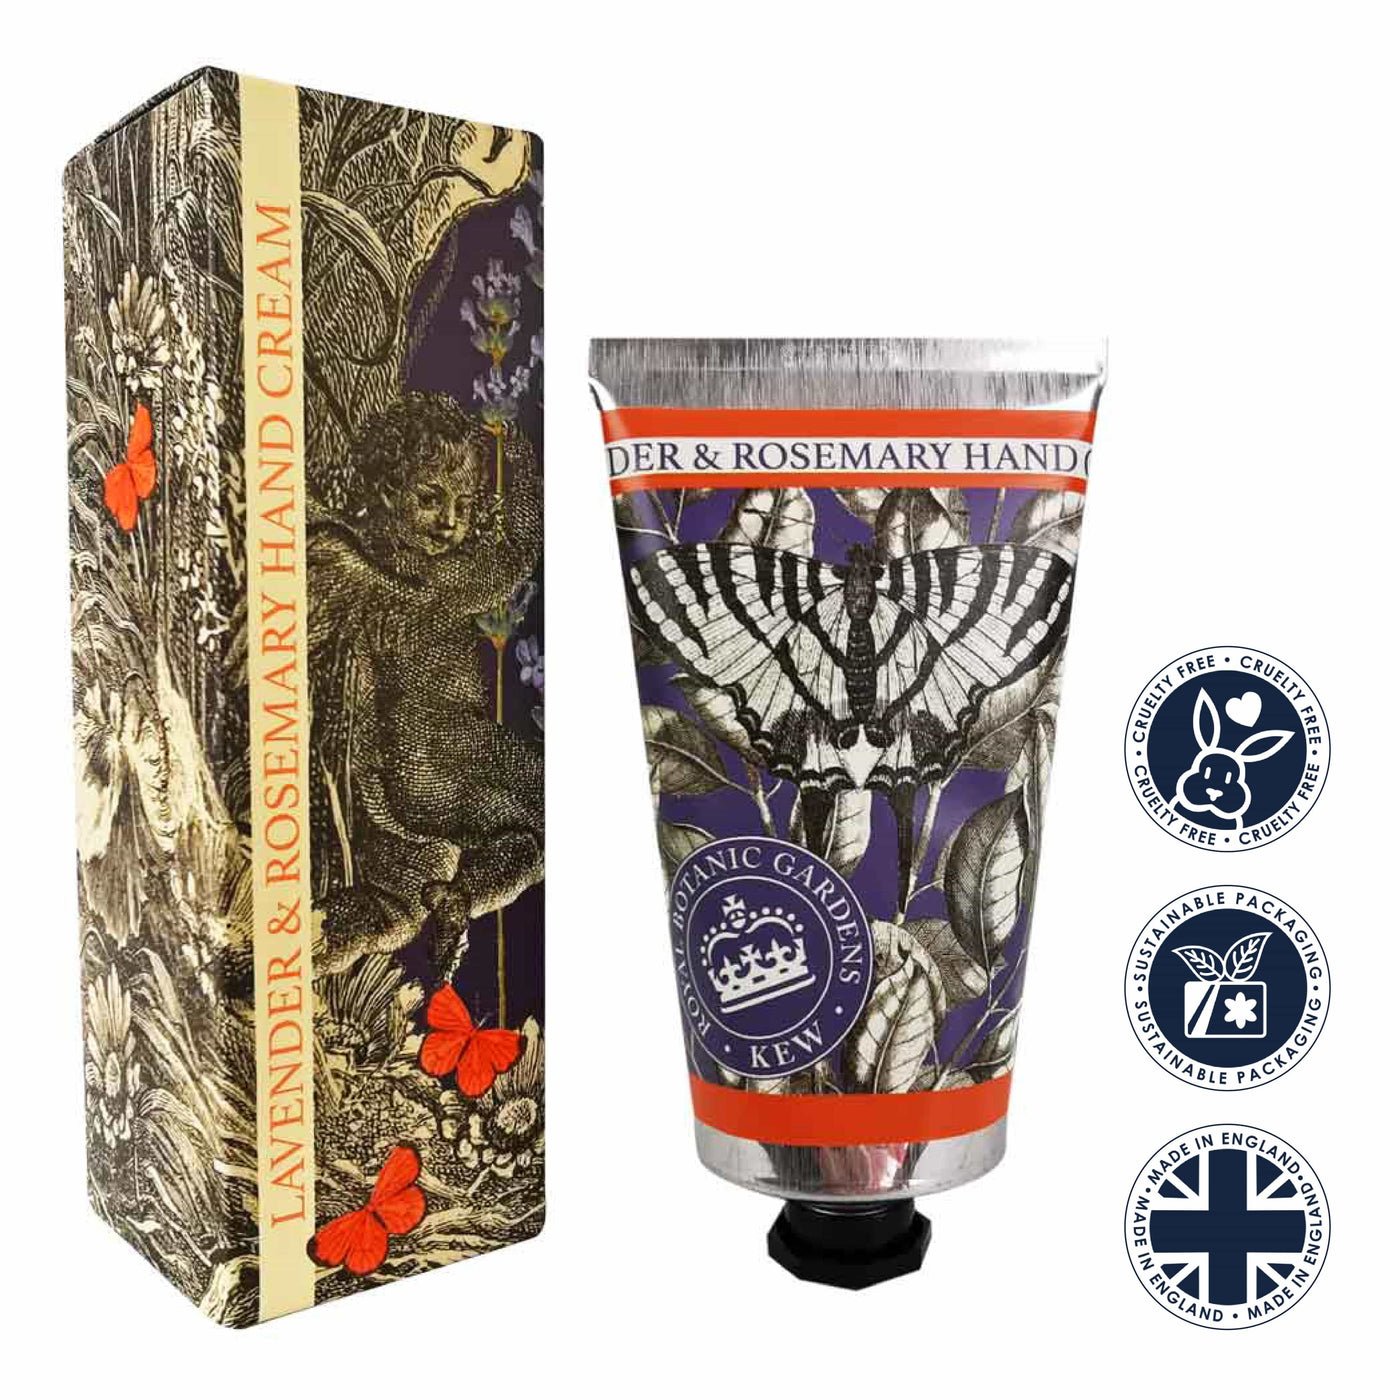 Kew Gardens Rosemary & Lavender Hand Cream 75ml from our Hand Cream collection by The English Soap Company